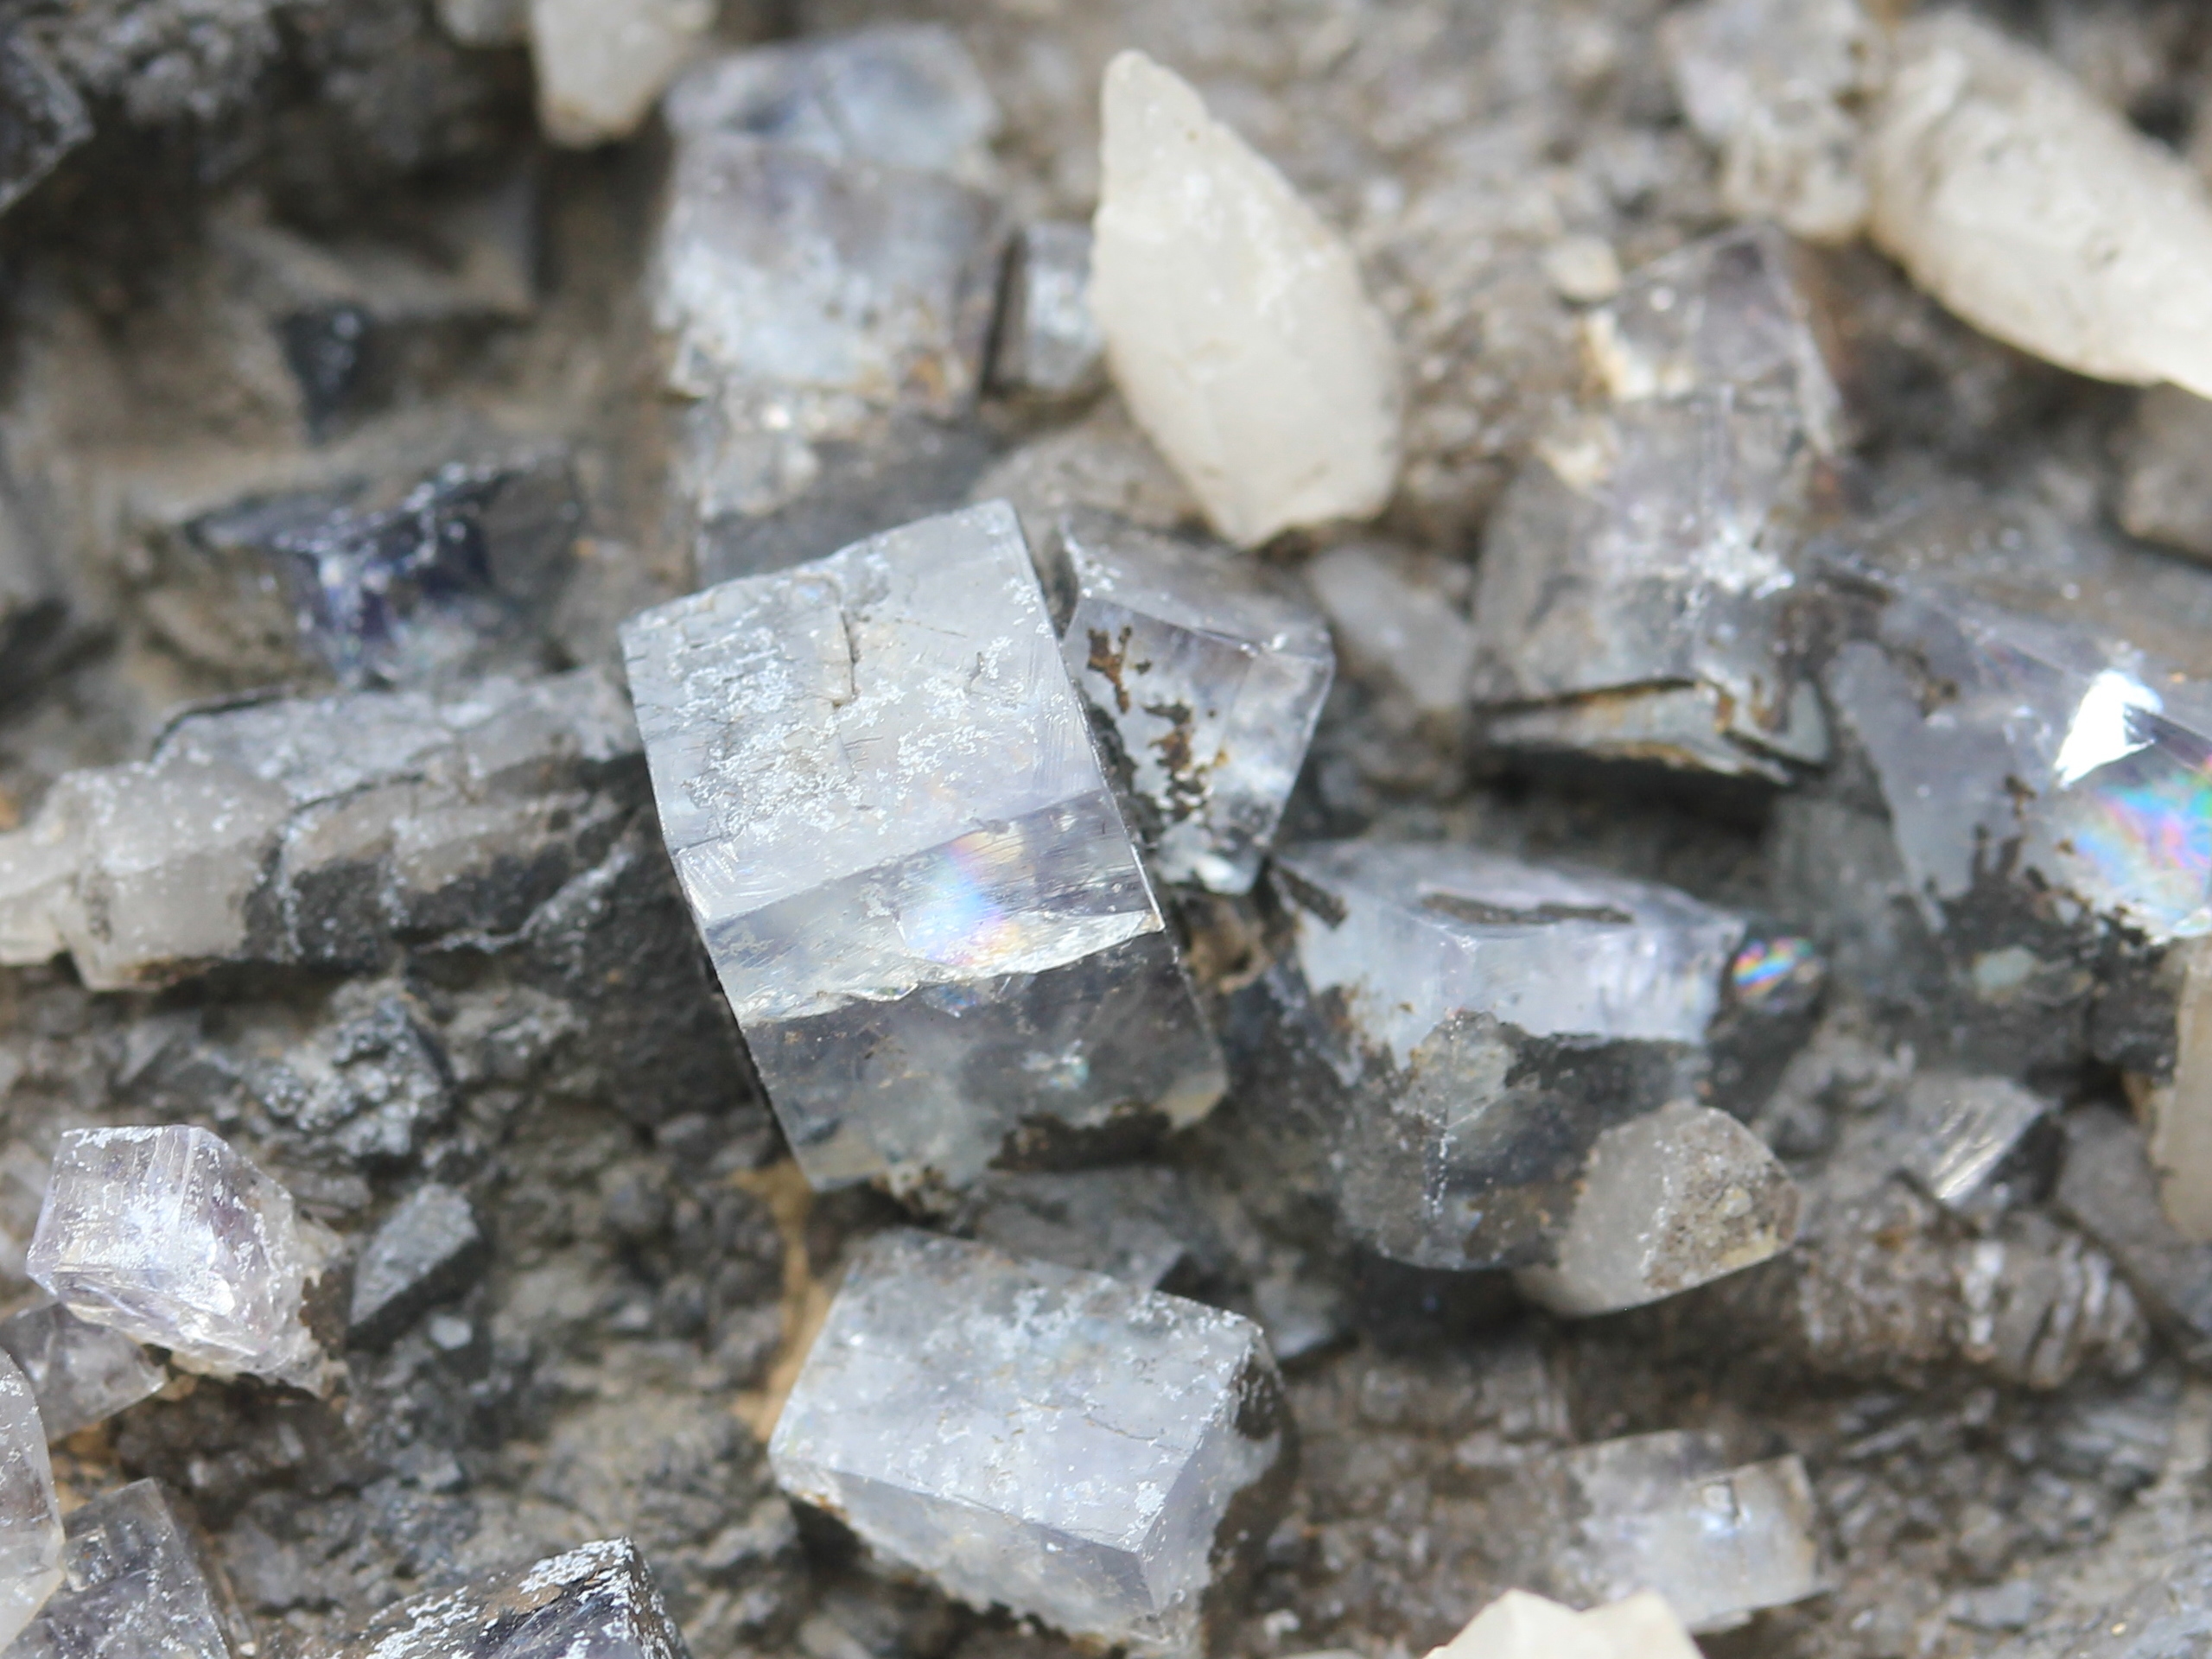 Fluorite and calcite crystals